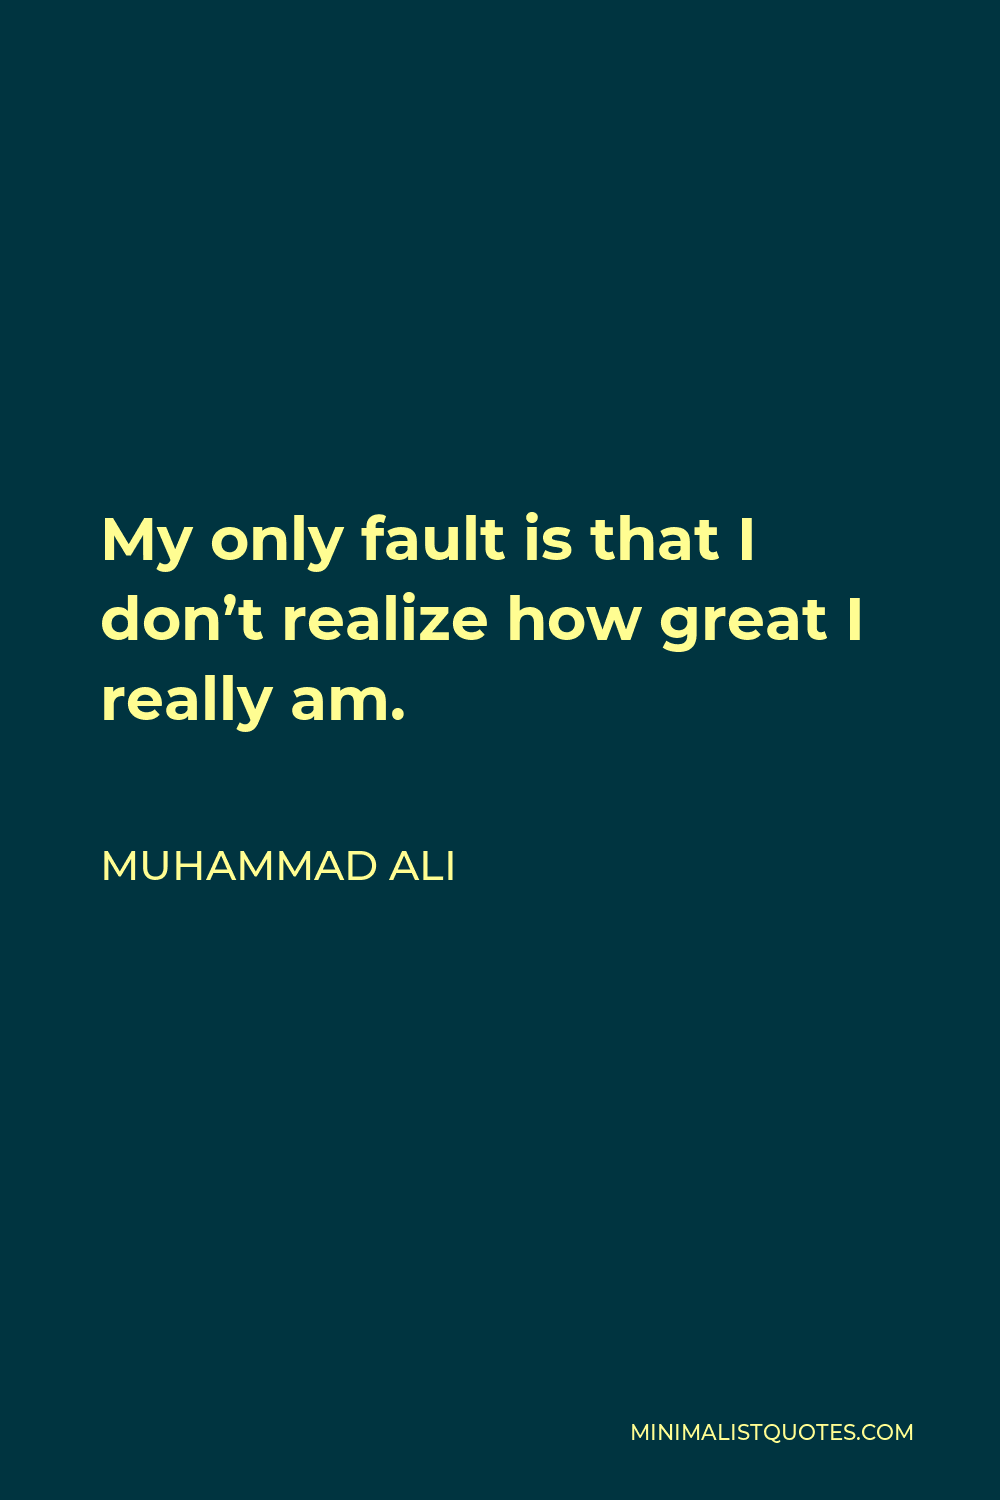 Muhammad Ali Quote: My only fault is that I don't realize how great I ...